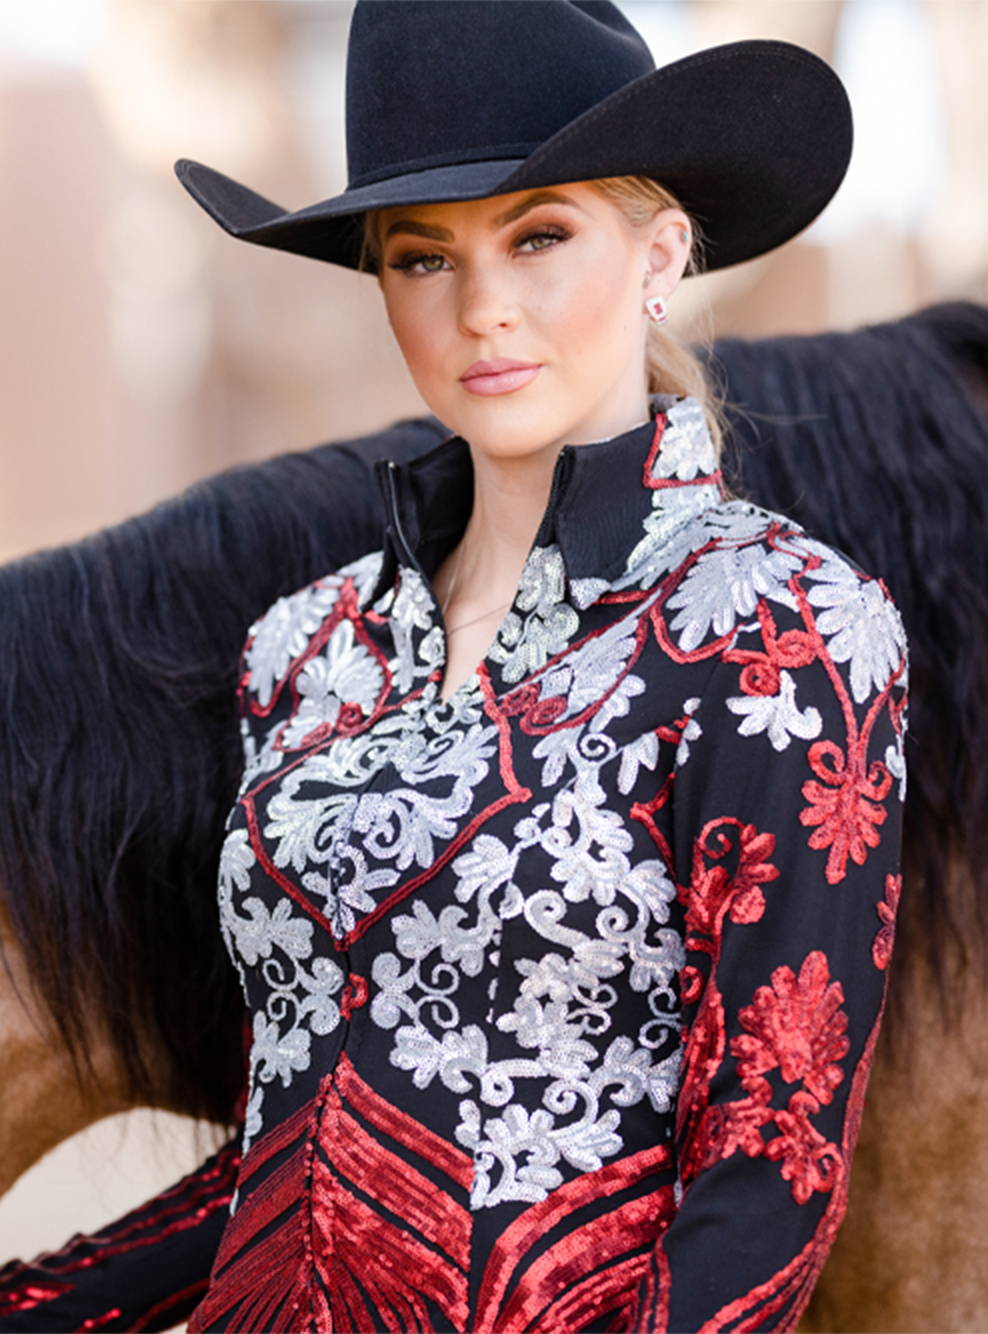 Show attire that inspires confidence and elegance in the saddle. 